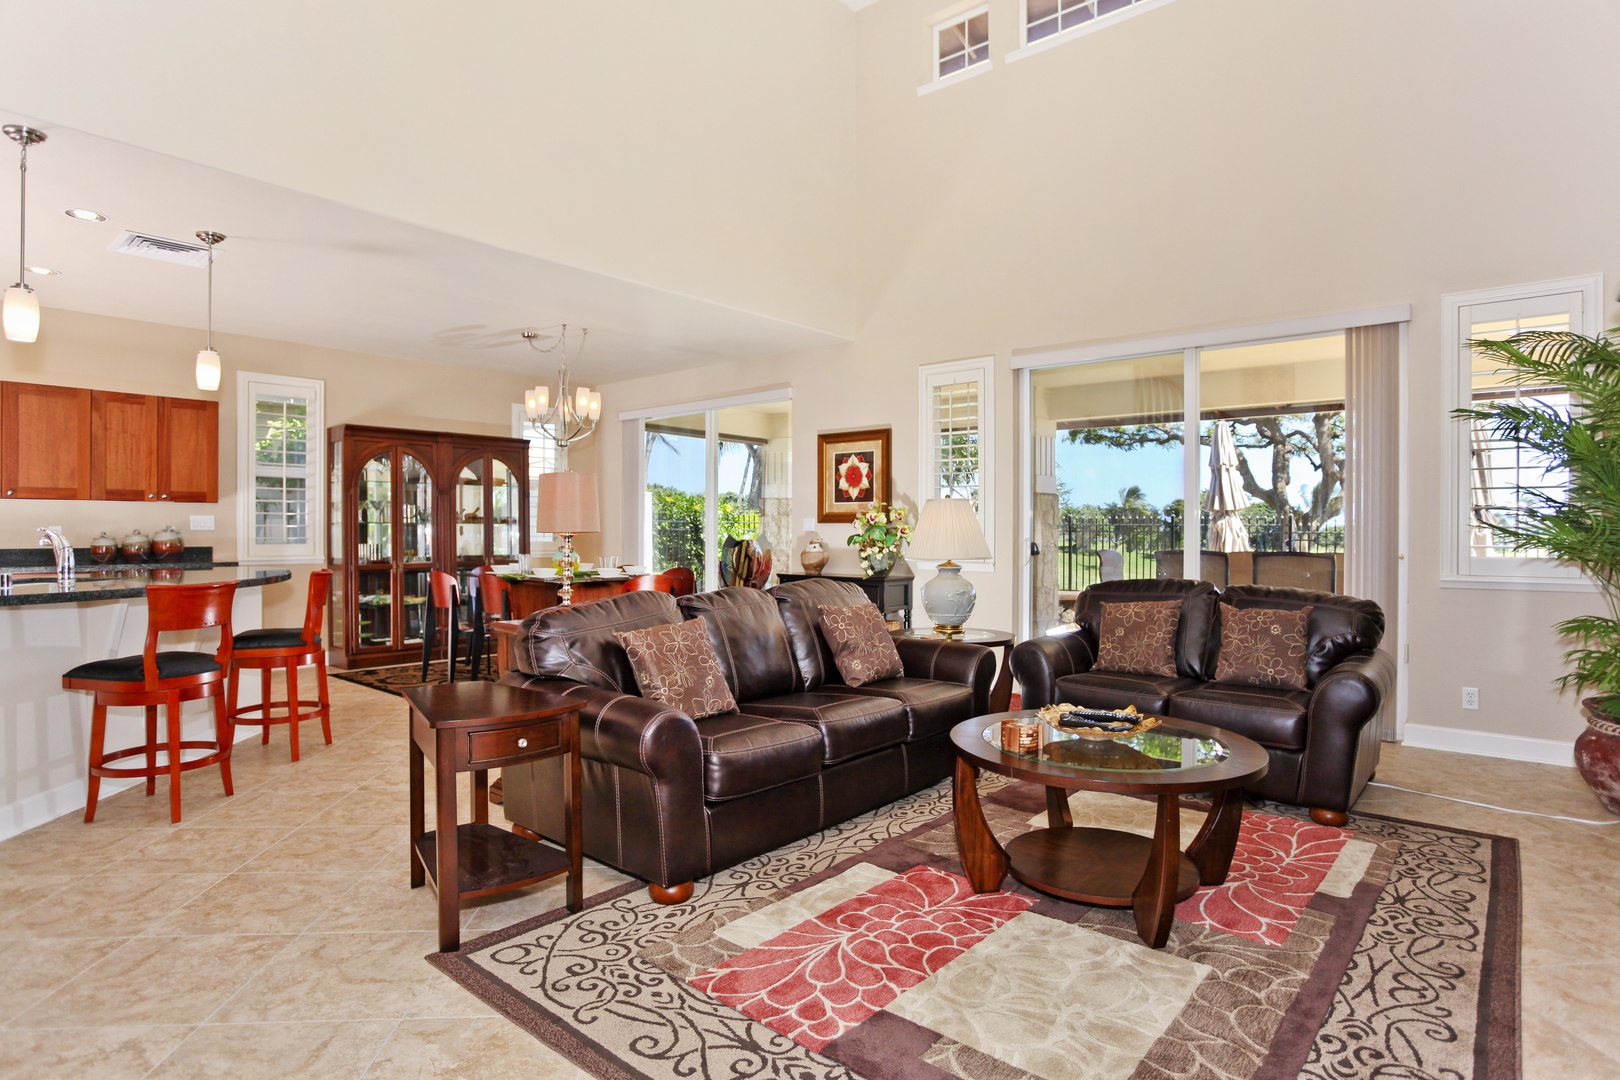 Kapolei Vacation Rentals, Ko Olina Kai Estate #20 - The expansive living and dining area with scenery from the lanai.